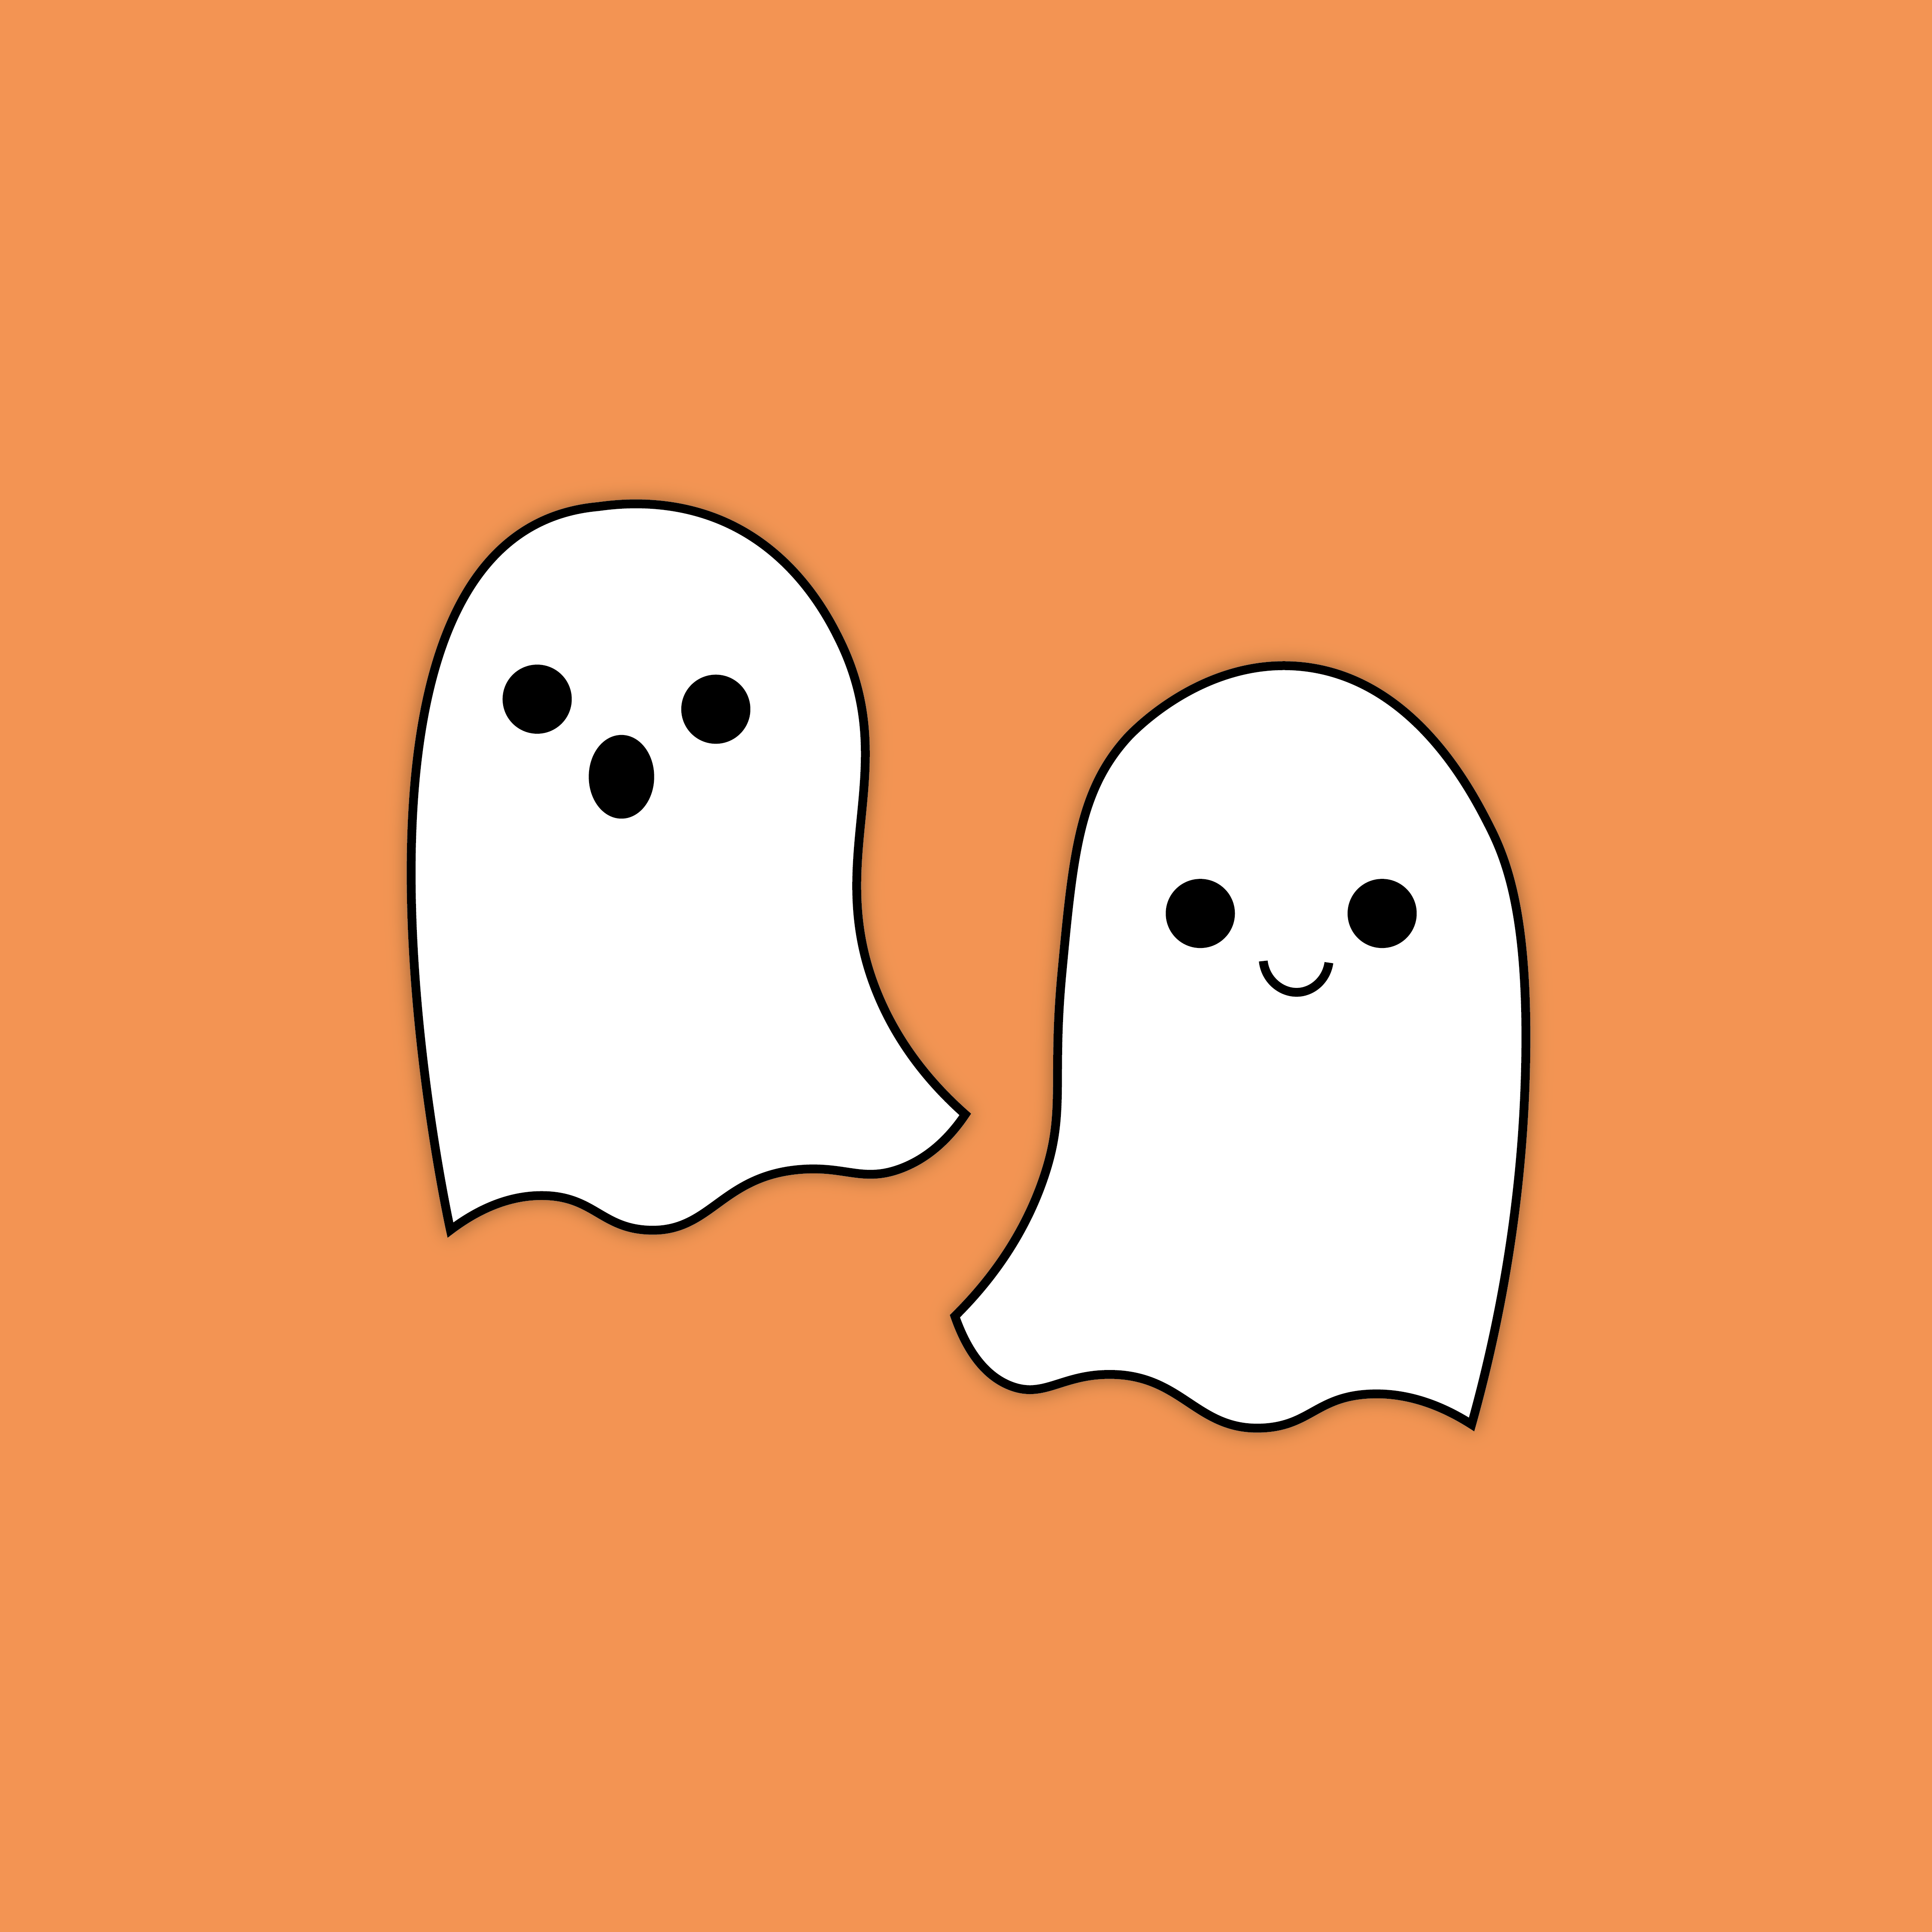 Two ghosts on an orange background - Cute Halloween